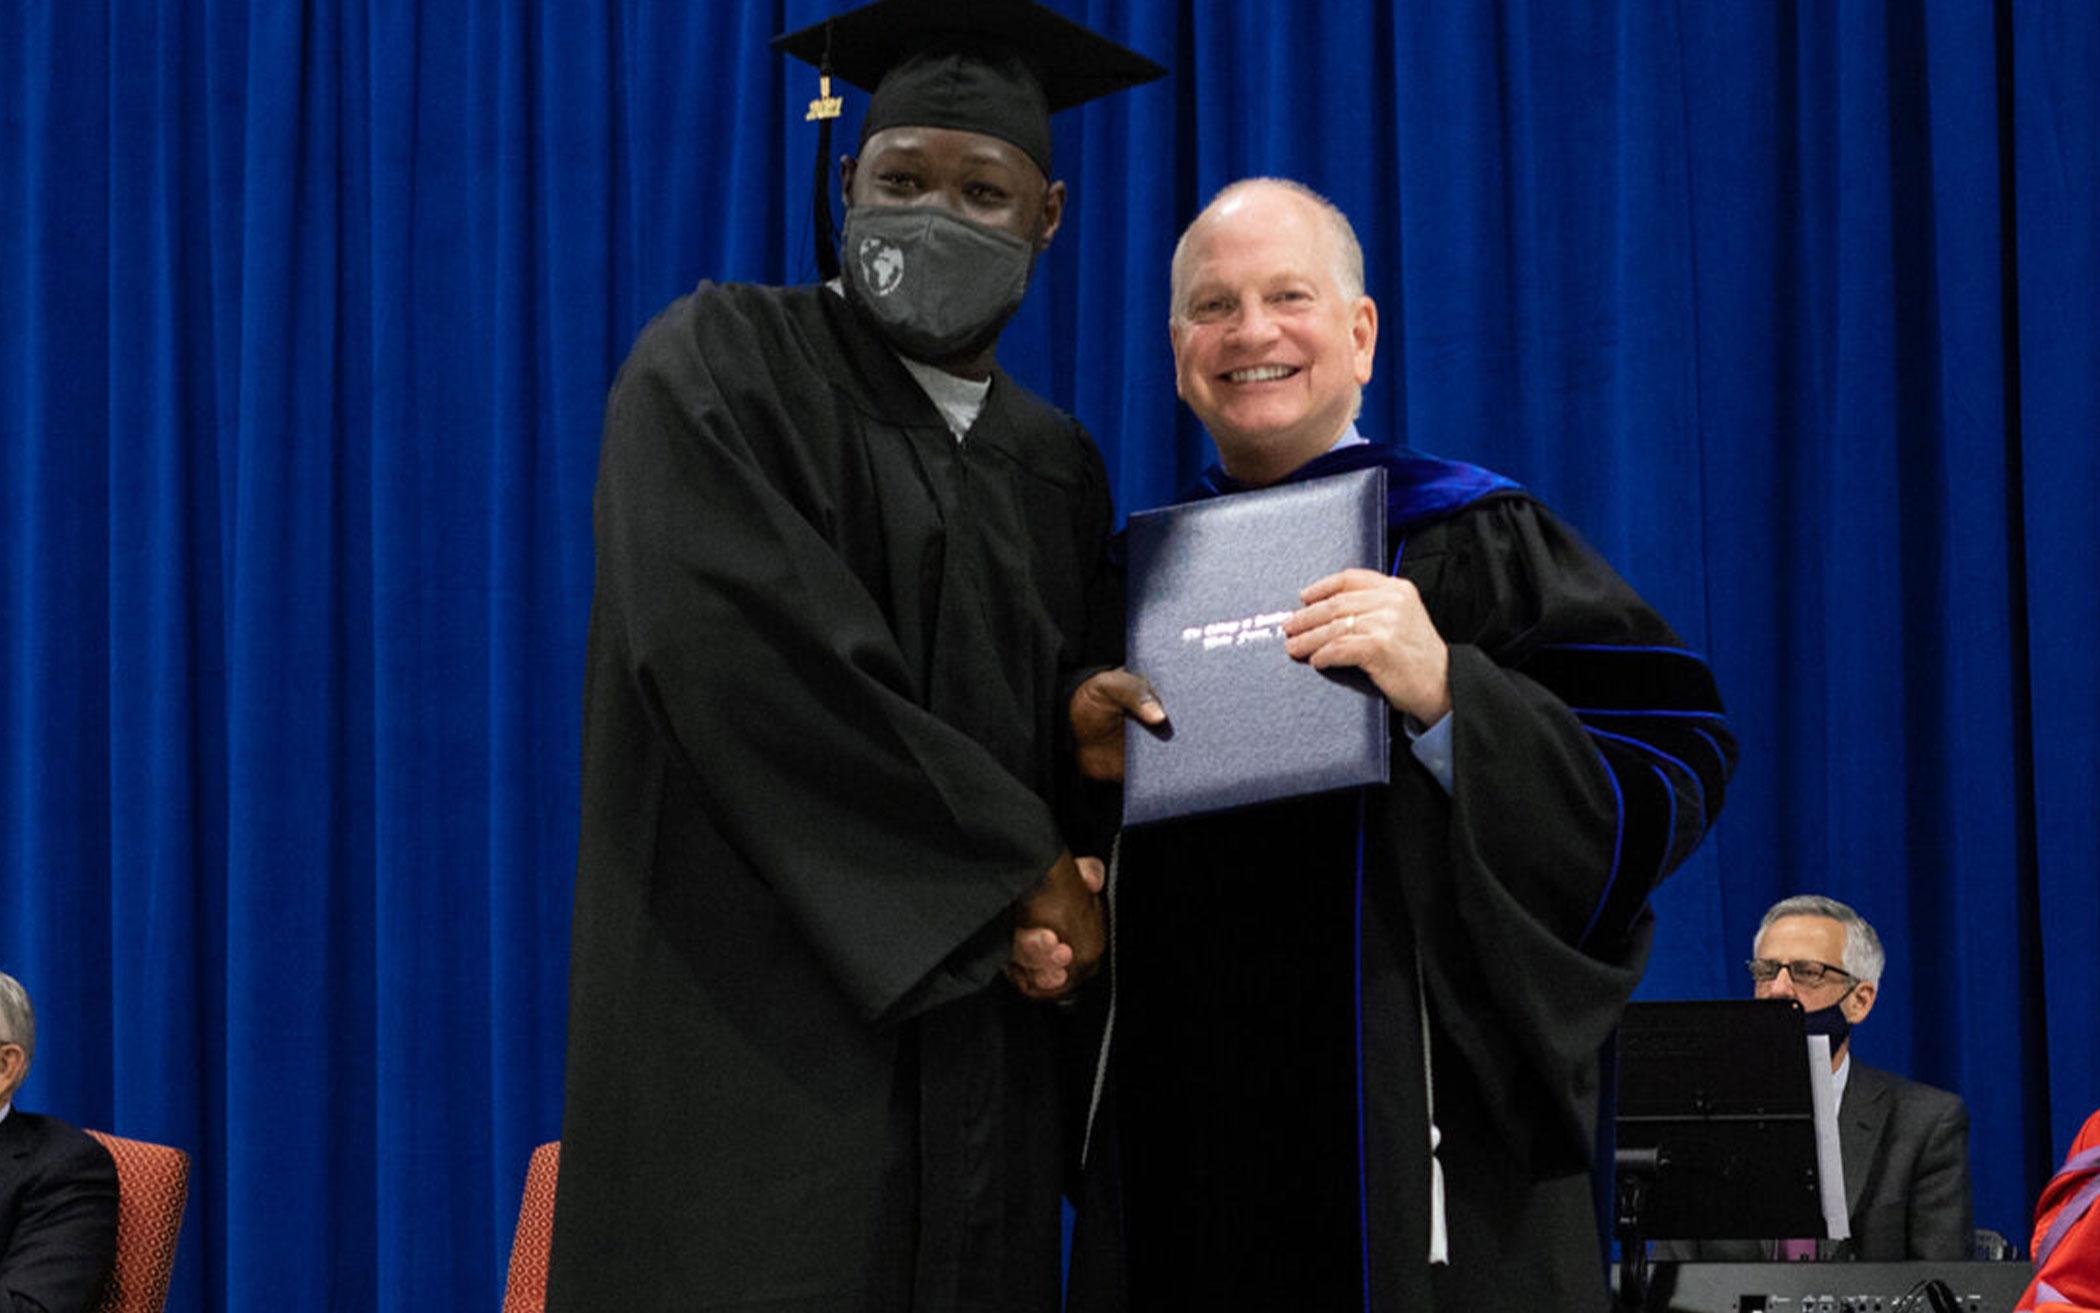 Danny Akin, right, poses with a graduate during the College at Southeastern graduation ceremony Dec. 15, 2021, at Nash Correctional Institution in Nashville, N.C. Photo courtesy of Southeastern Baptist Theological Seminary in Wake Forest, N.C.